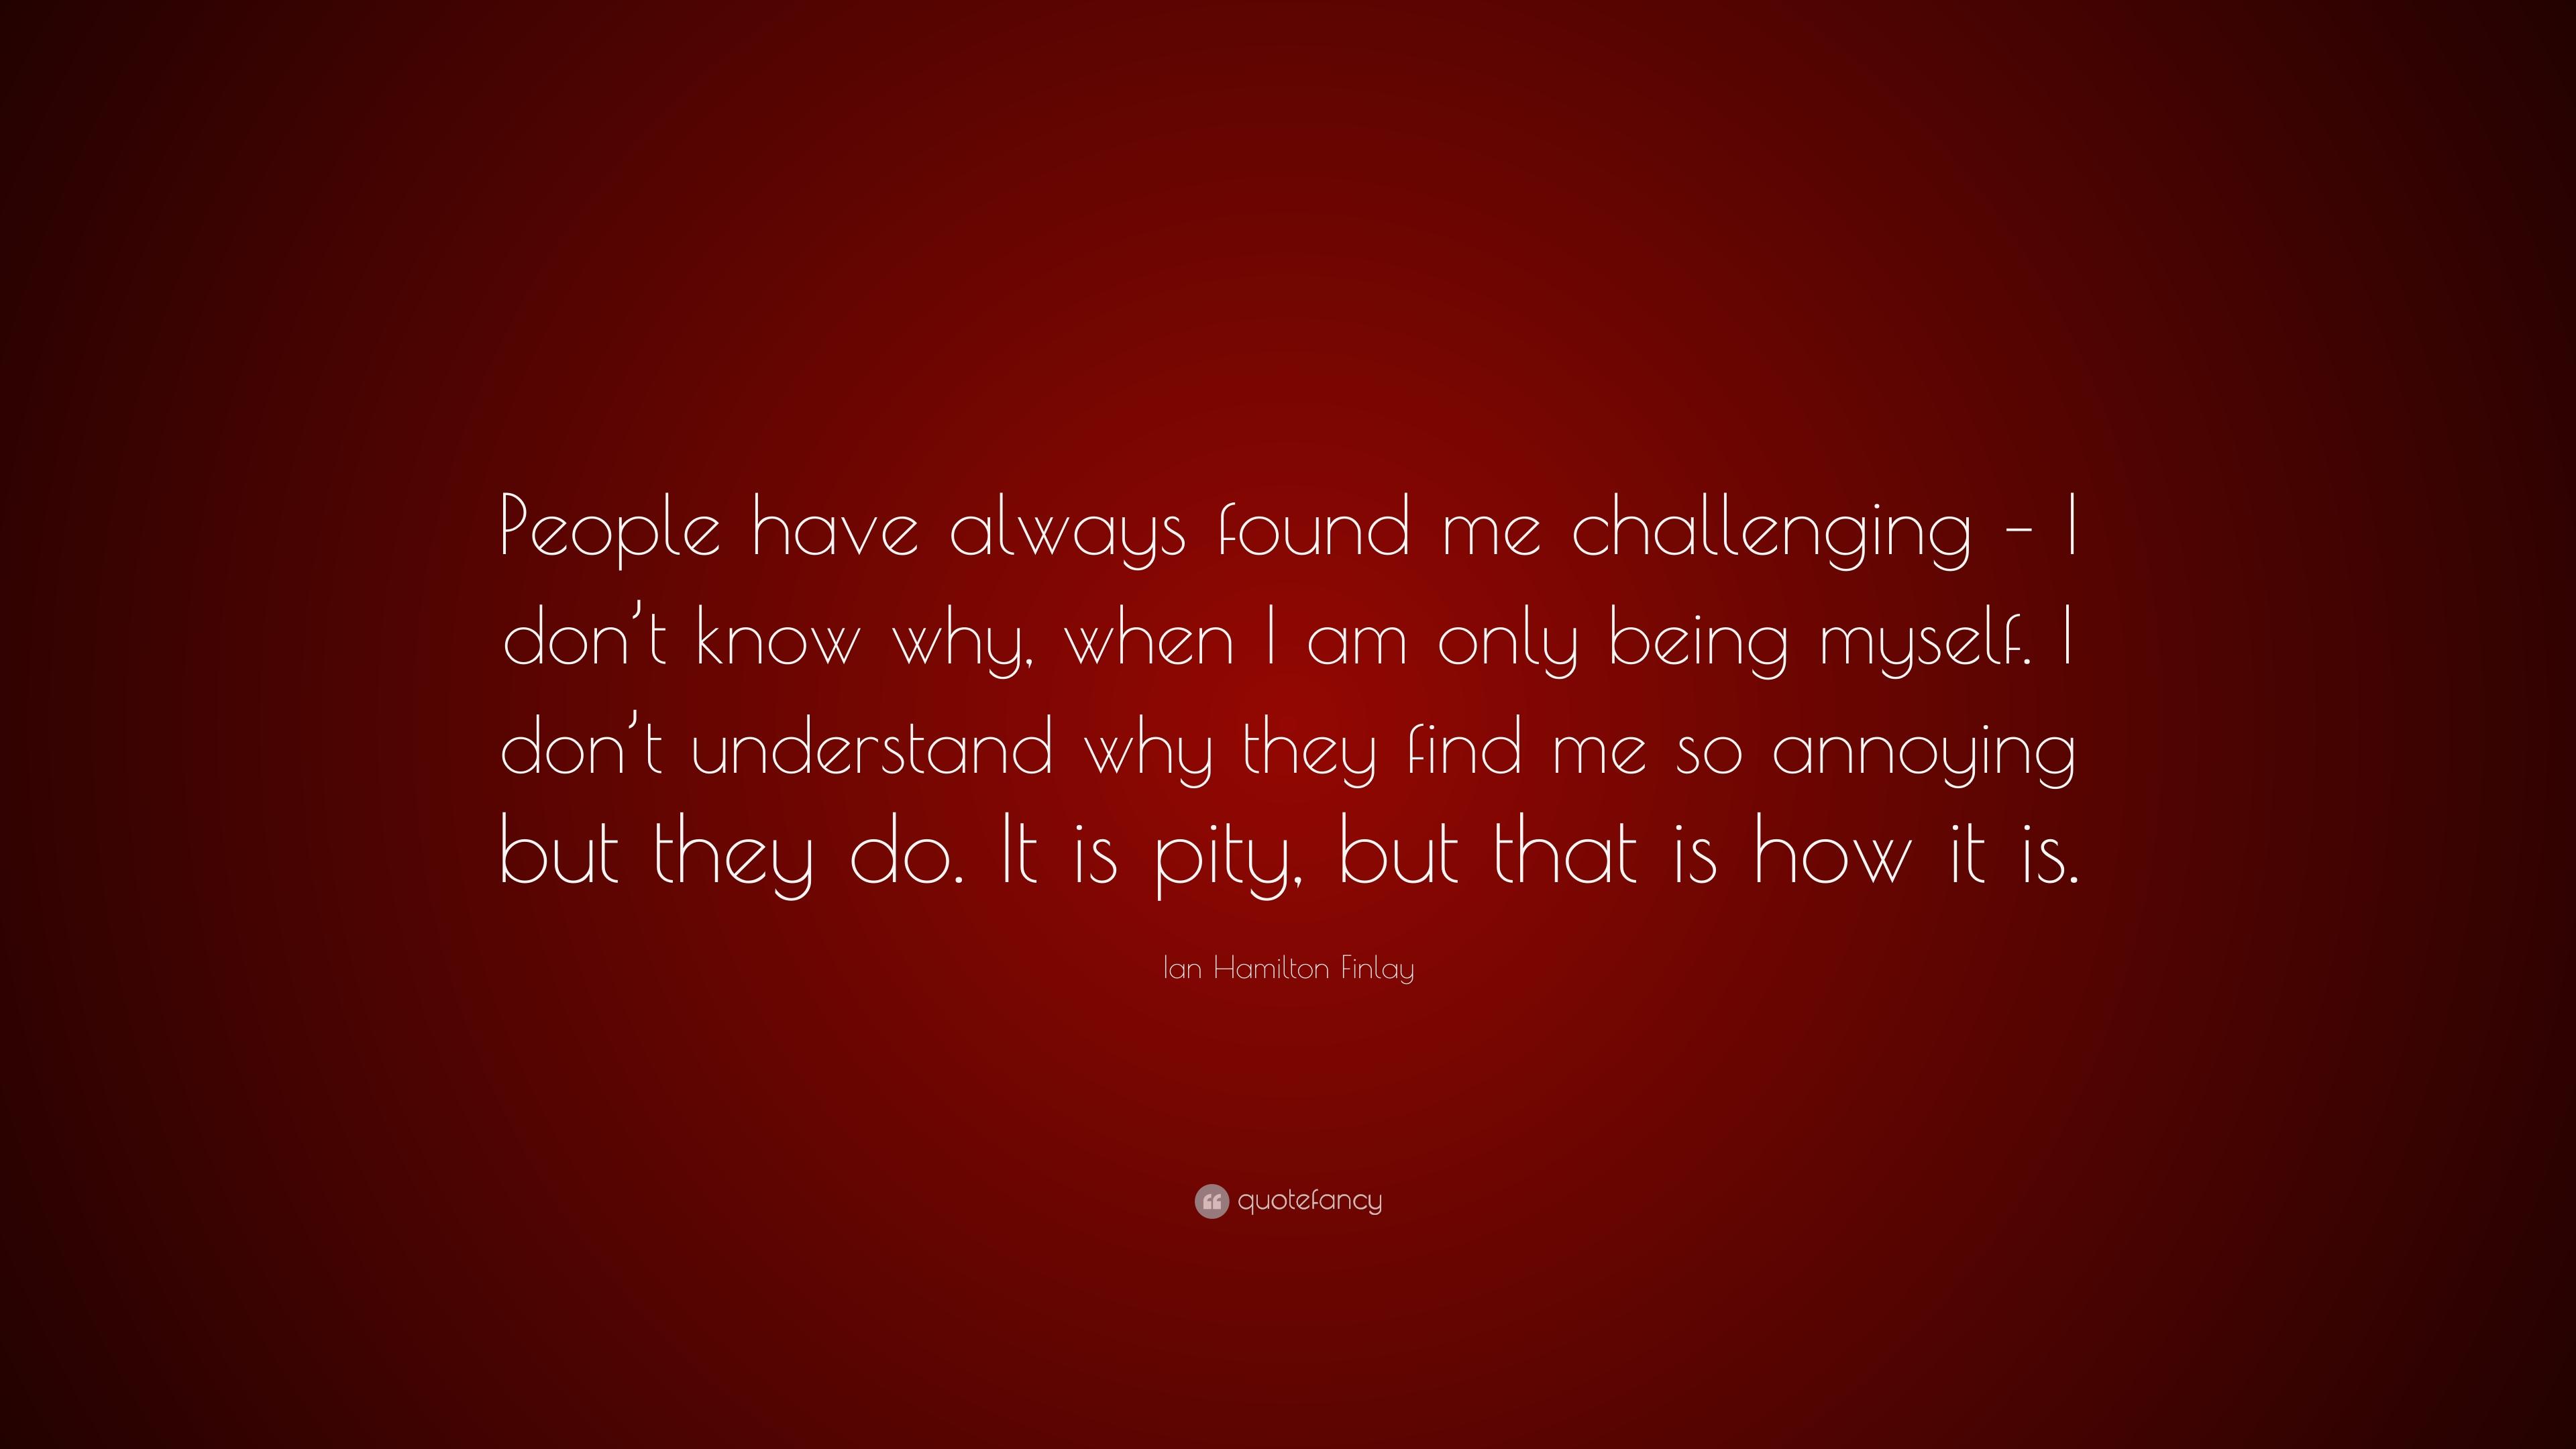 Ian Hamilton Finlay Quote: “People have always found me challenging